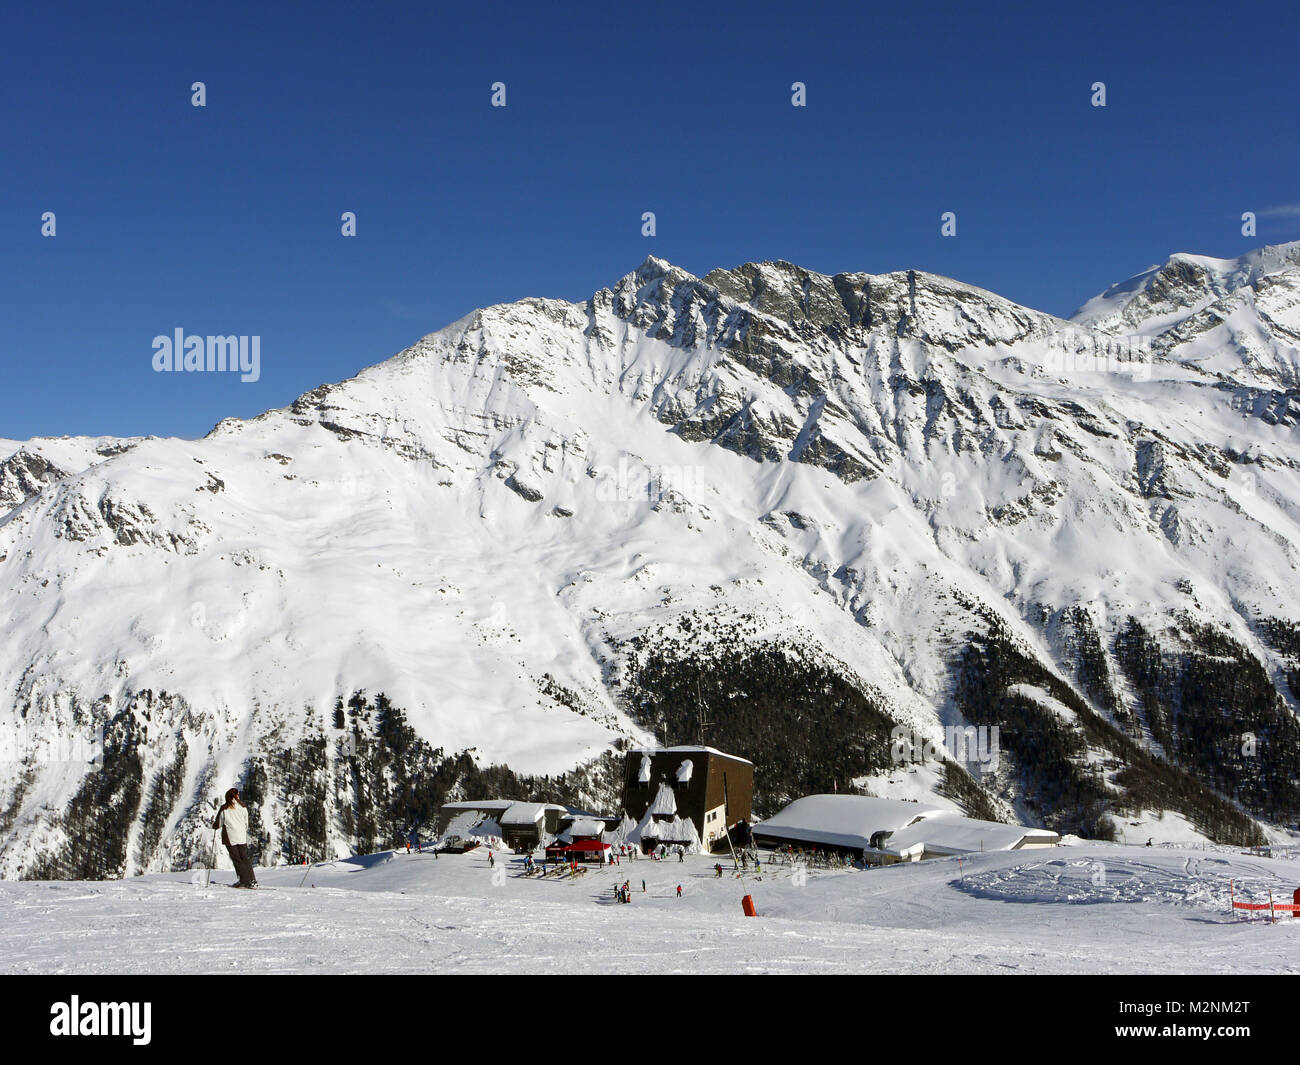 Winter scenes in the snowsports resort of Zinal in the Valais canton of Switzerland with a view to the middle station at Sorebois Stock Photo